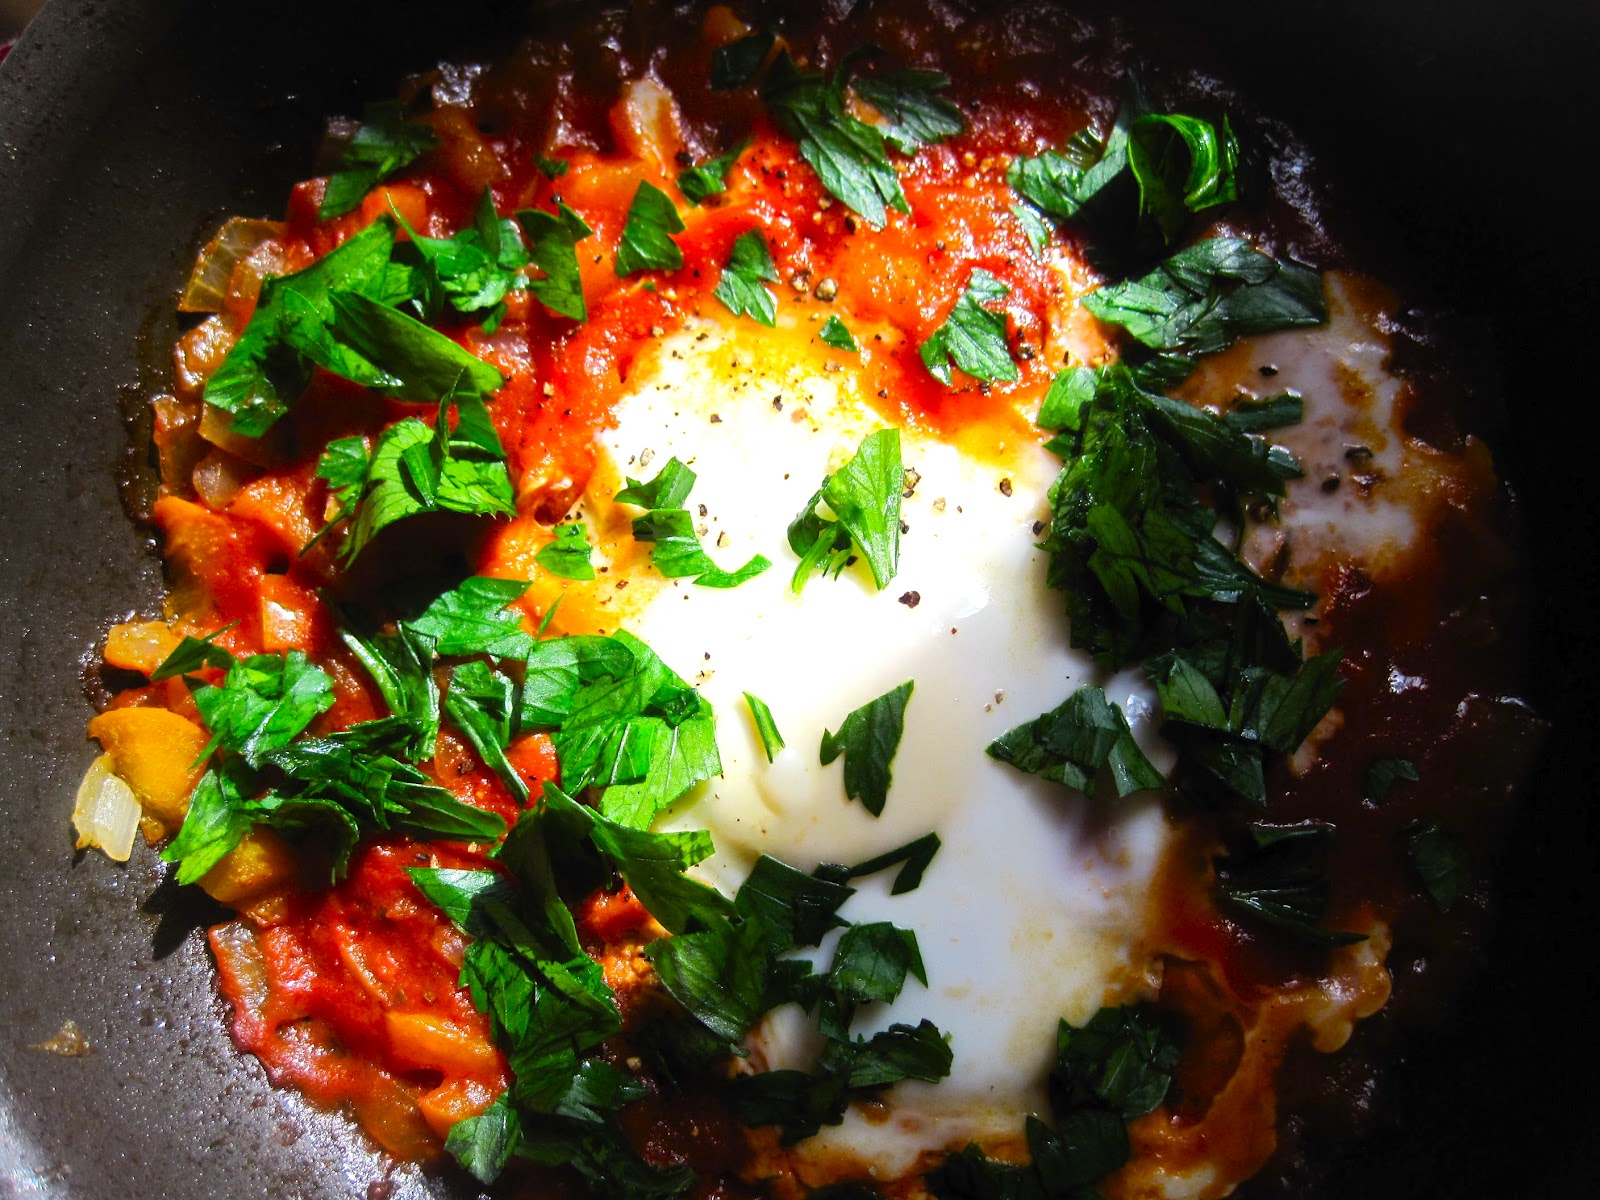 Kvell in the Kitchen: Shakshouka (Spicy Tomato Sauce Poached Eggs)